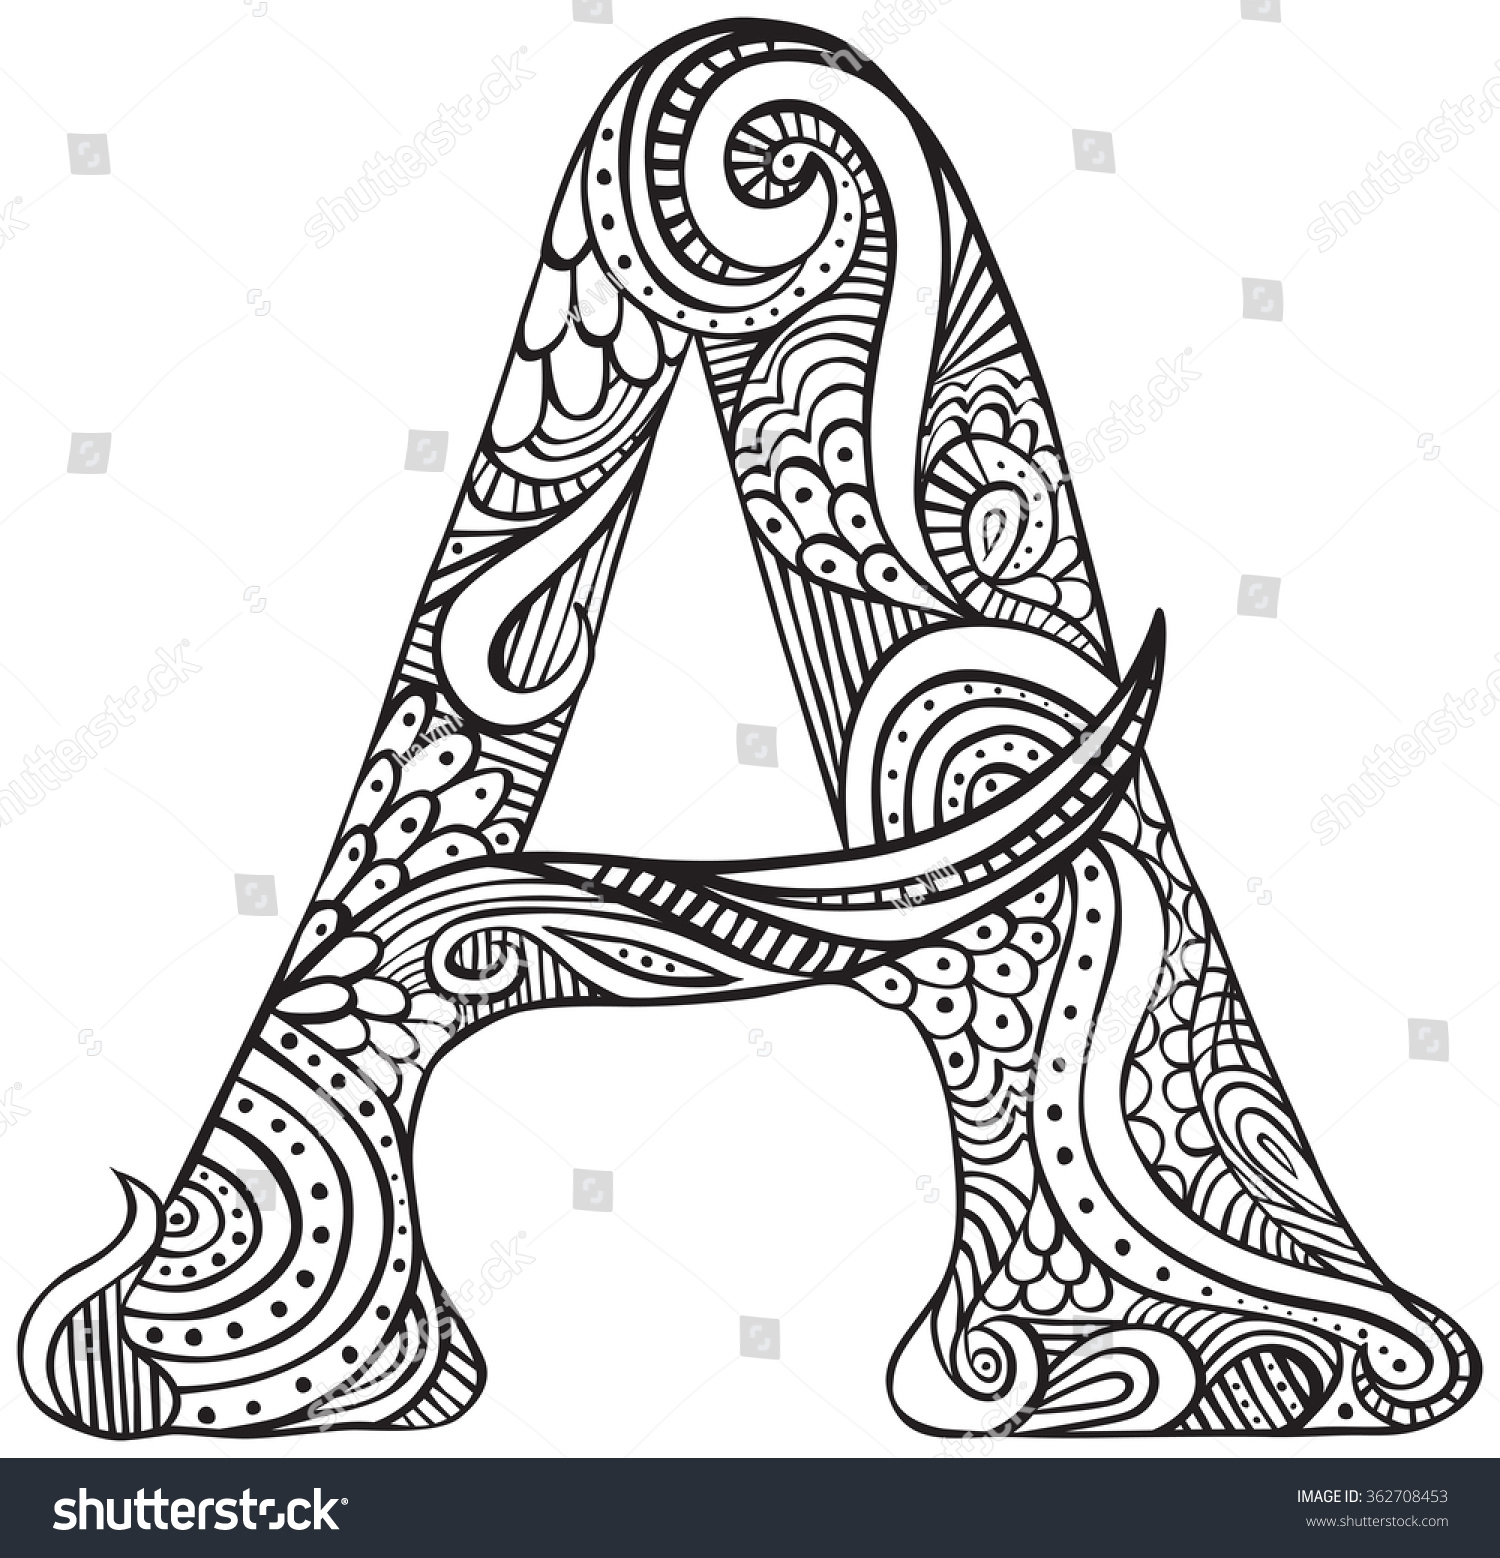 Hand Drawn Capital Letter Black Coloring Stock Vector 362708453 ...